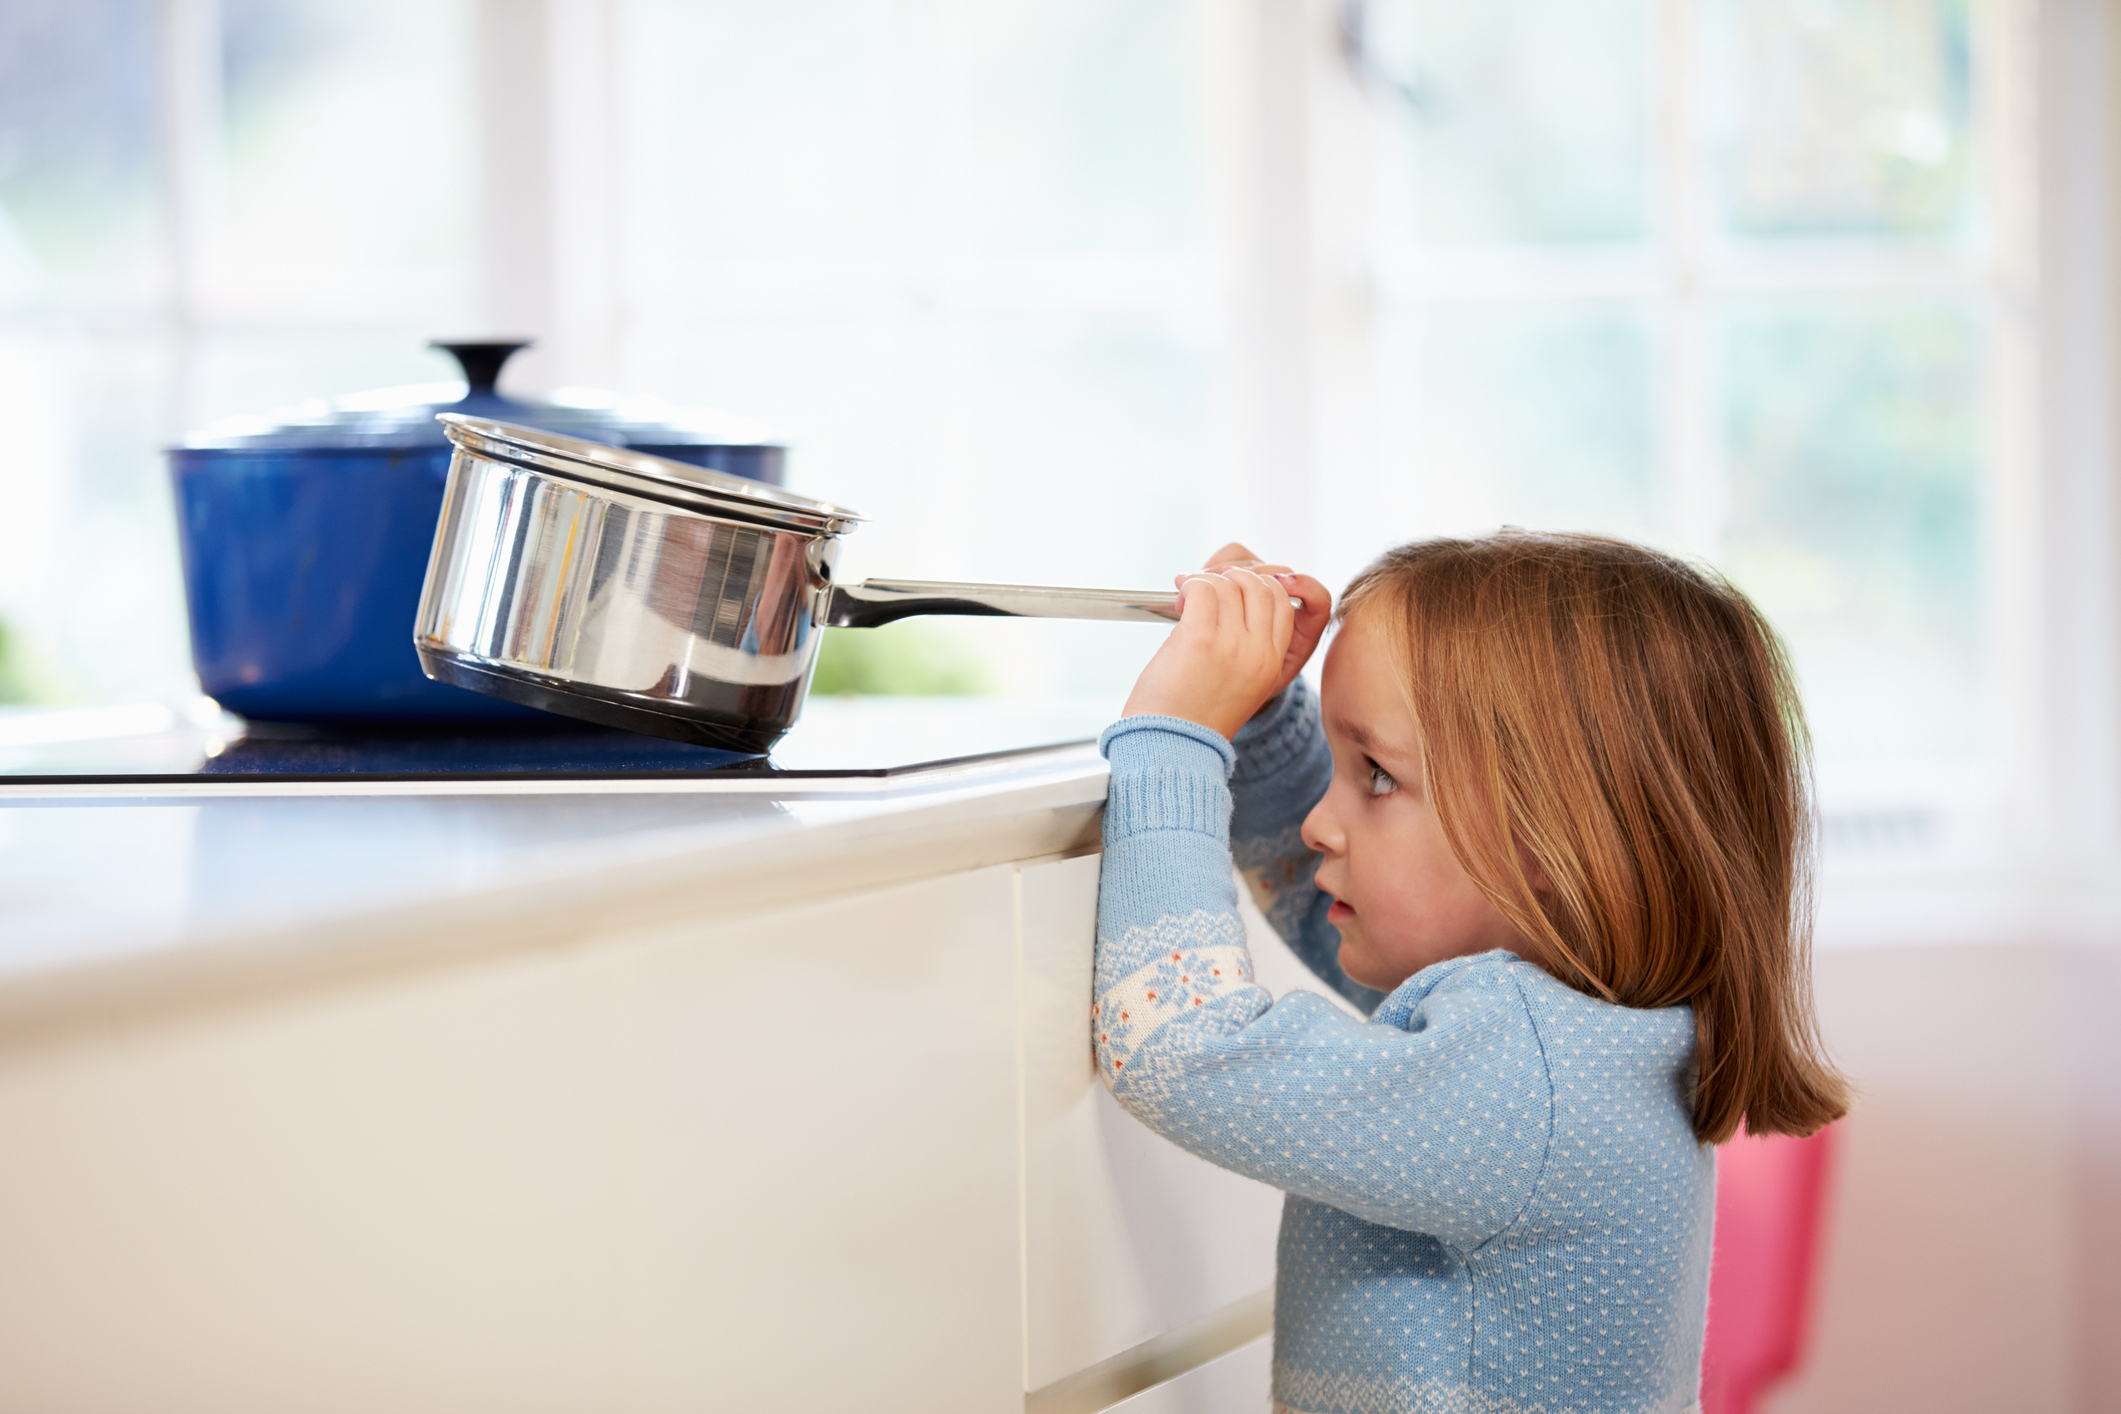 Small girl pulling a pan off the stove, risking injury